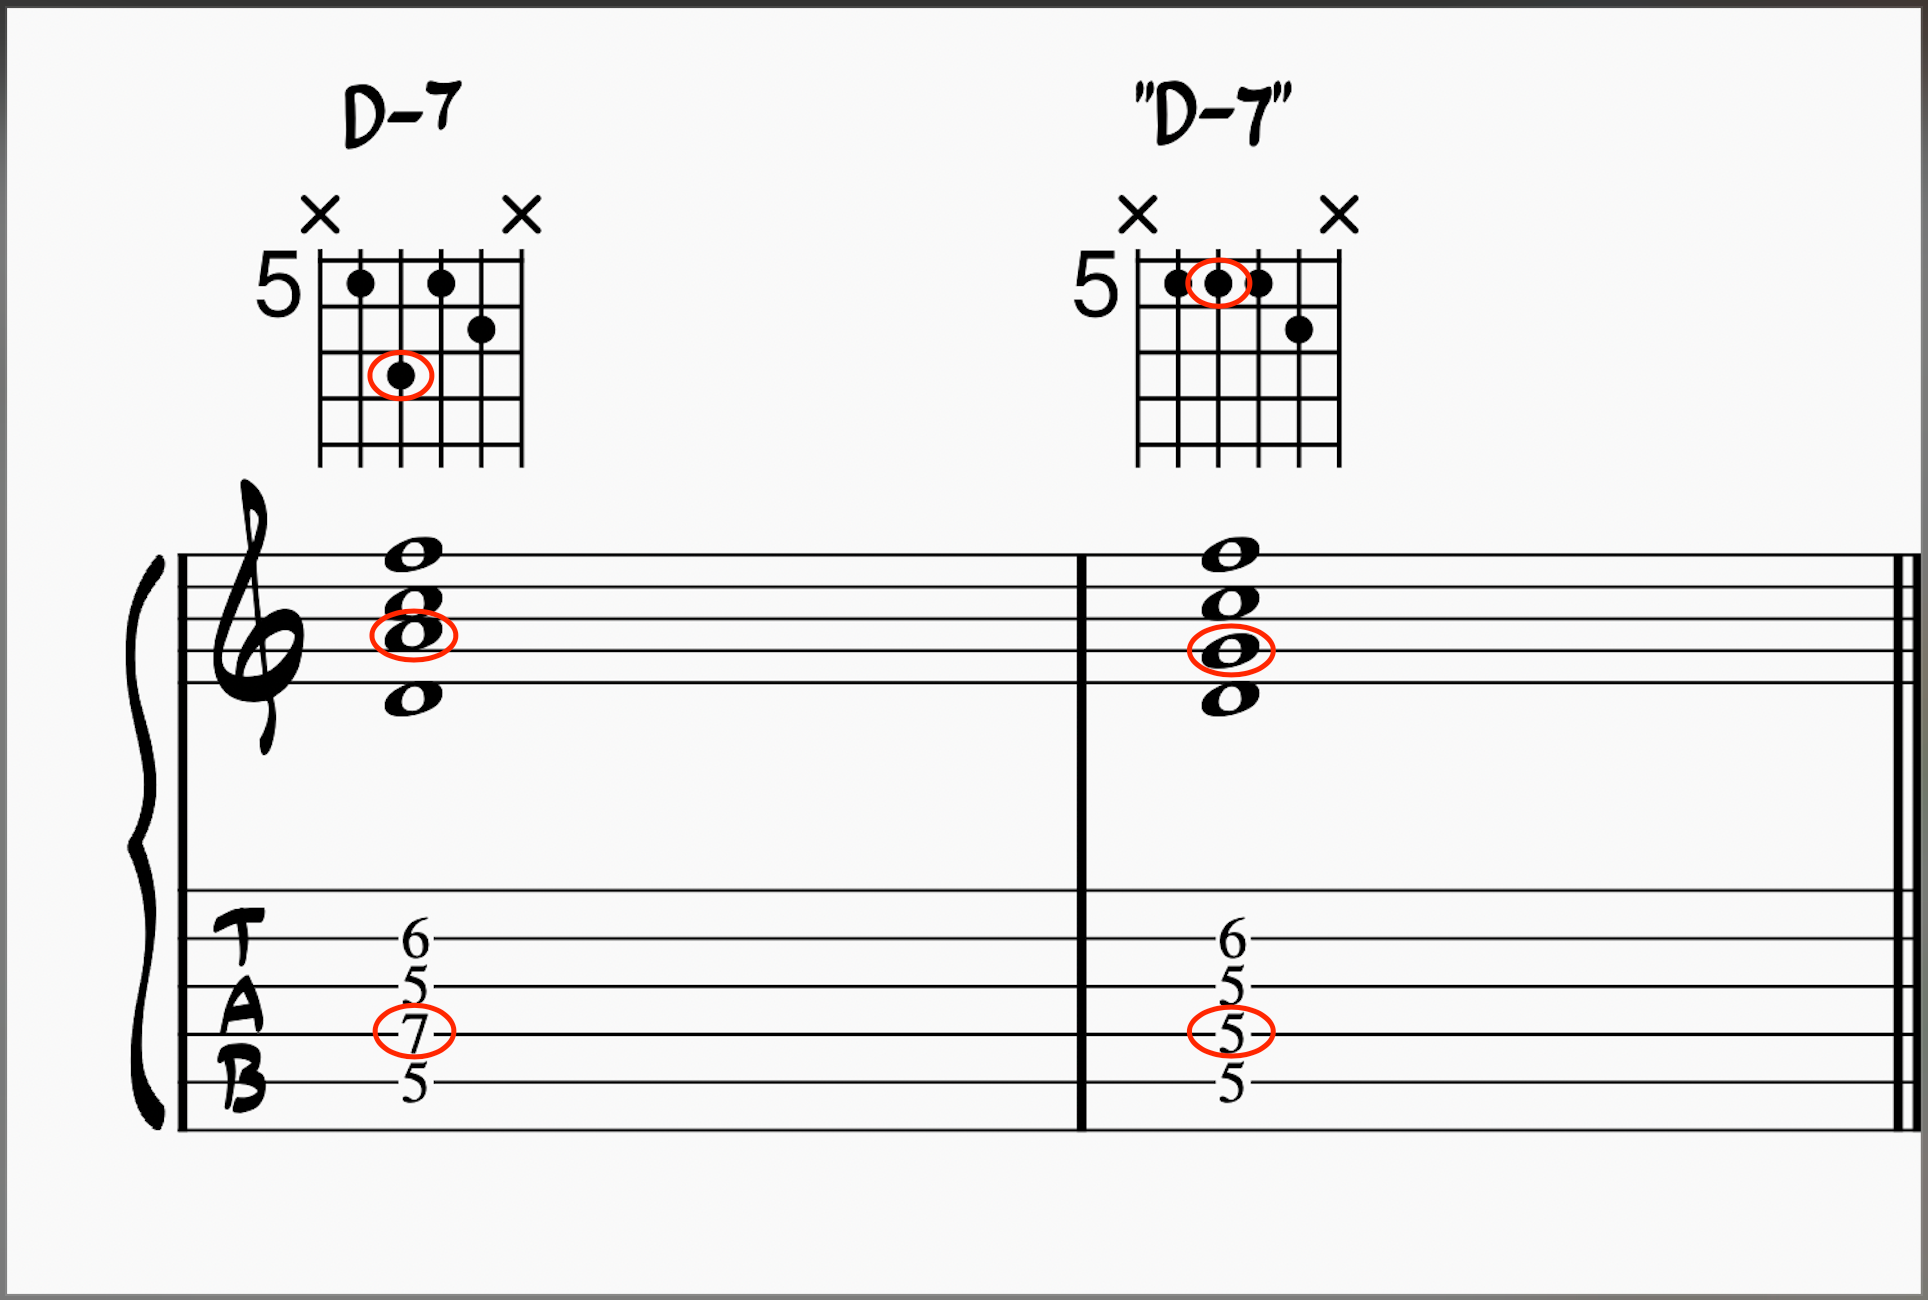 Comparing a D-7 voicing on guitar to its quartal voicing equivalent 